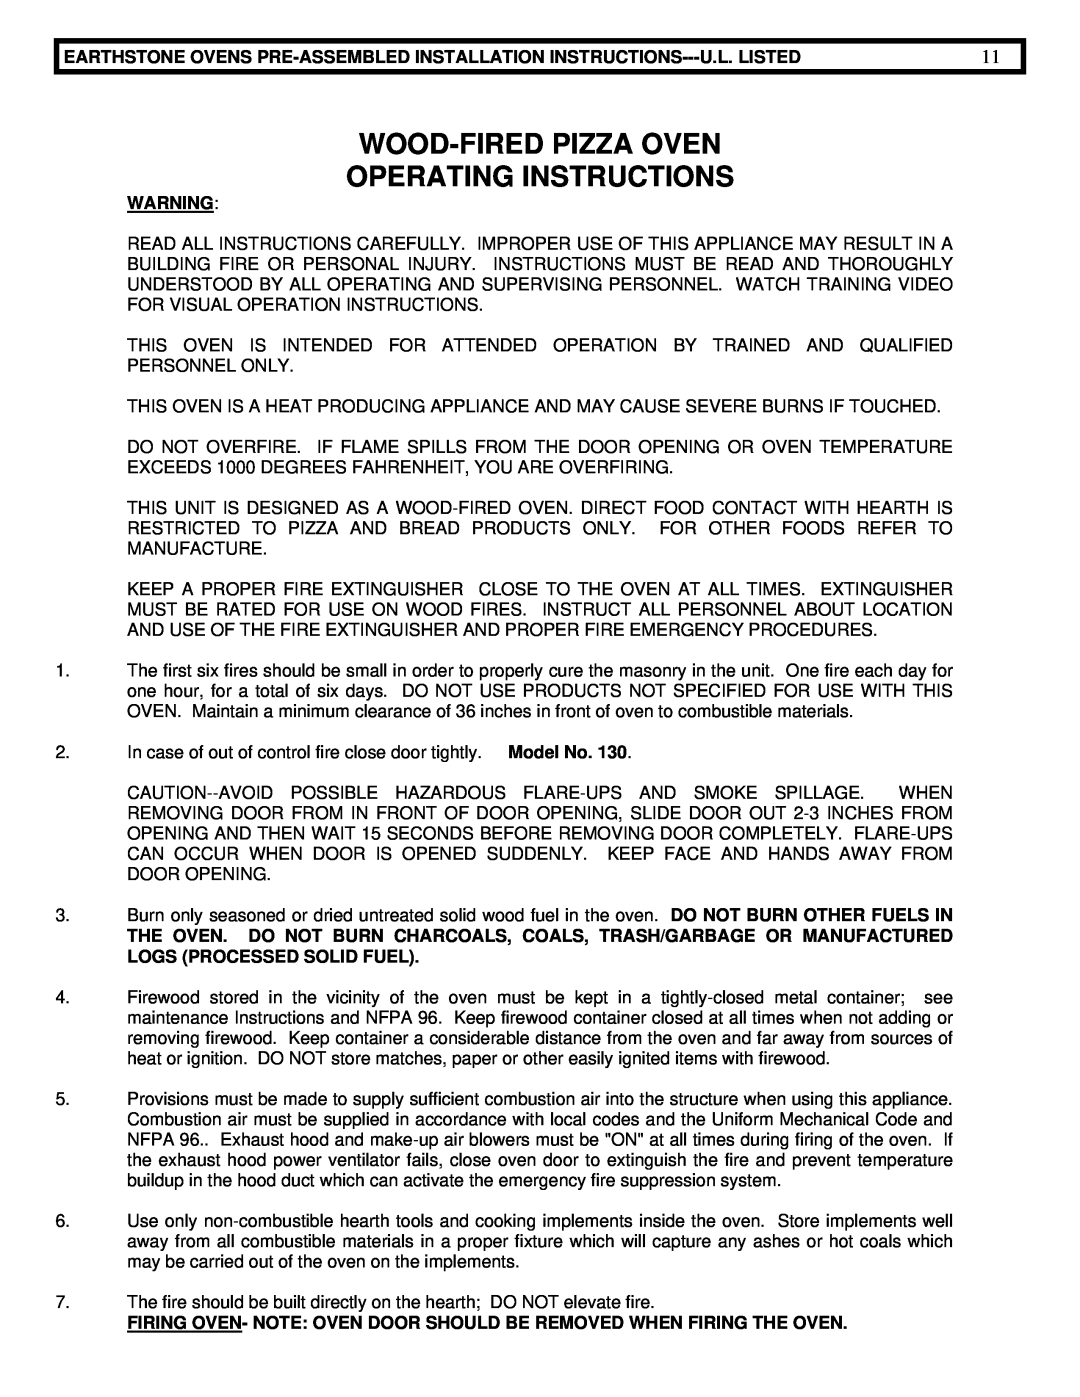 EarthStone woofire oven installation instructions Wood-Firedpizza Oven Operating Instructions 